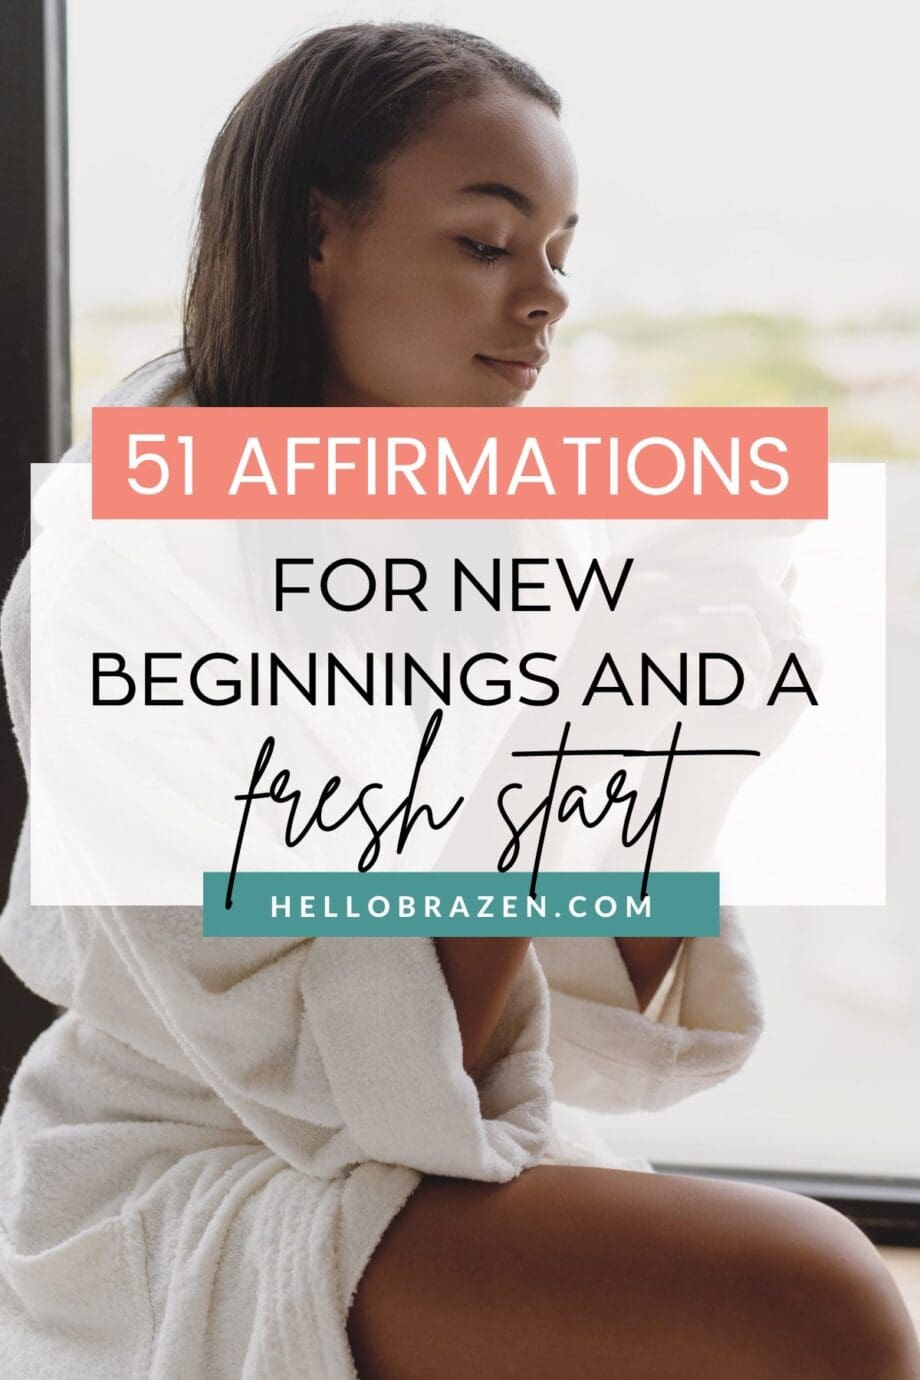 By using positive affirmations, you can help create a positive mindset and increase your self-esteem, which both go a long way to dealing with transitions and new beginnings. Here are 51 affirmations for new beginnings and a fresh start.